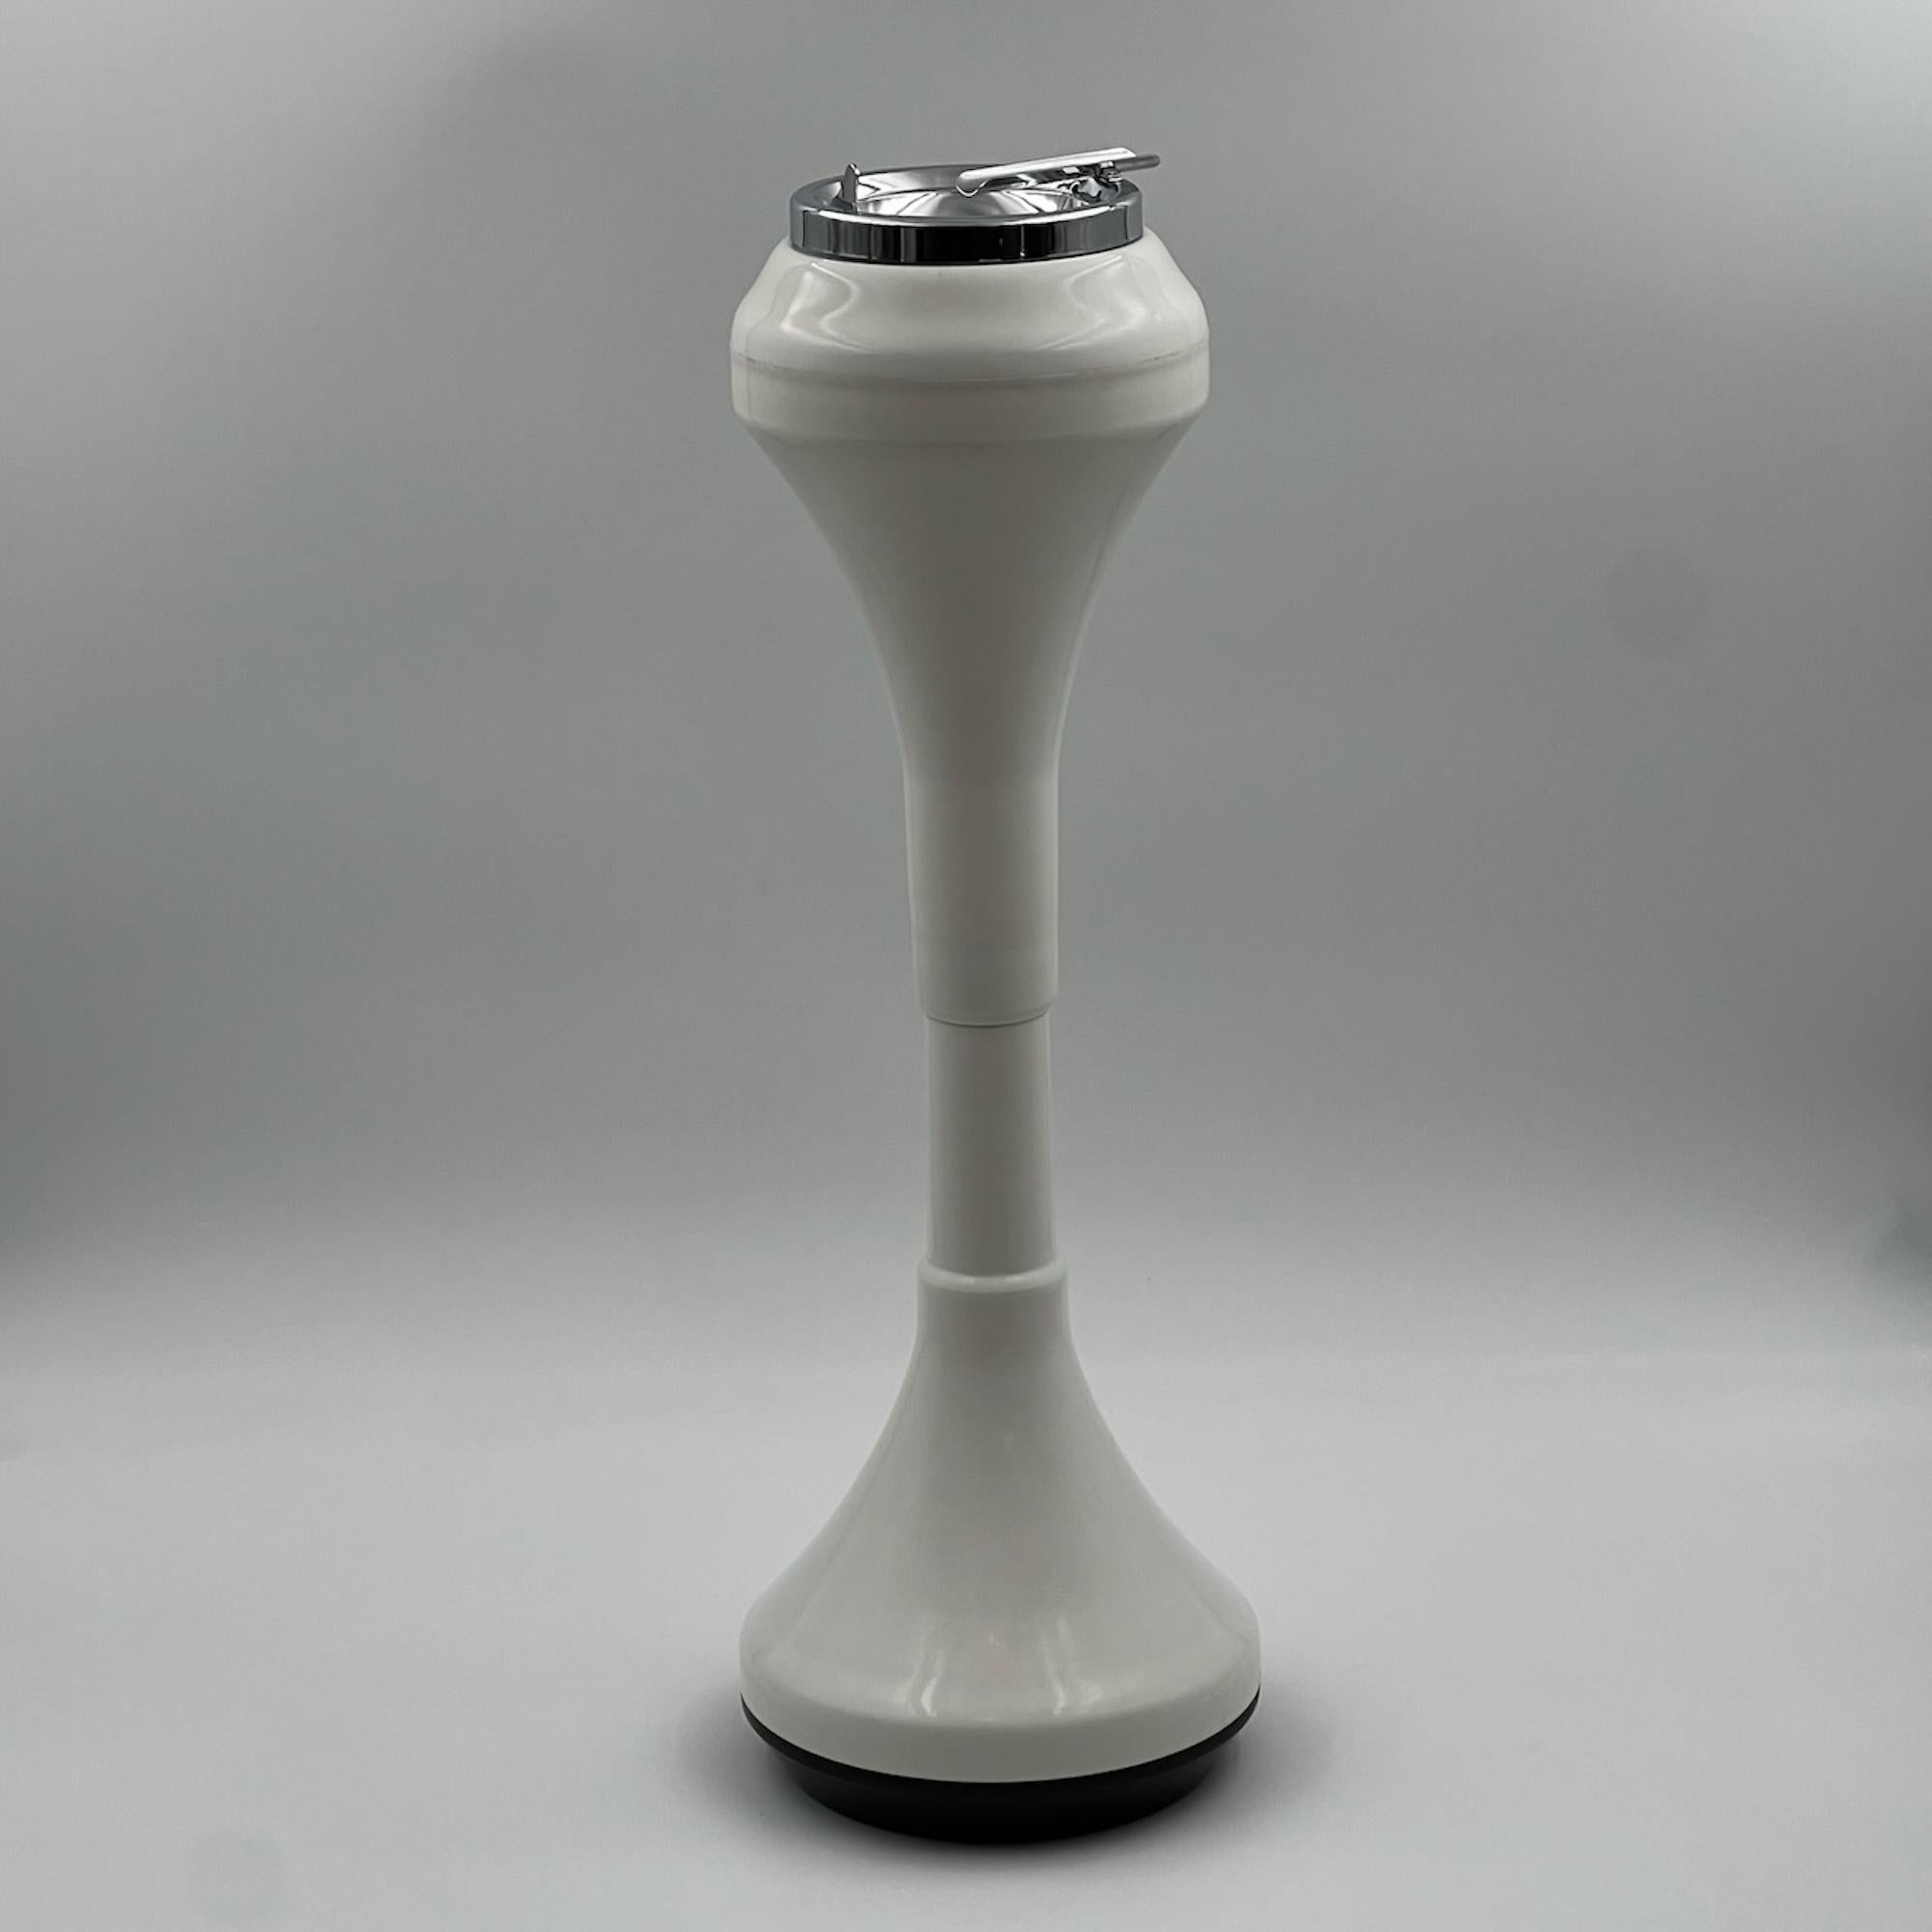 Indulge in the nostalgia of space age design with our exquisite Italian floor standing ashtray from the 1960s. Crafted with a sleek plastic silhouette in a timeless white hue, this ashtray seamlessly embodies the futuristic elegance of the space age